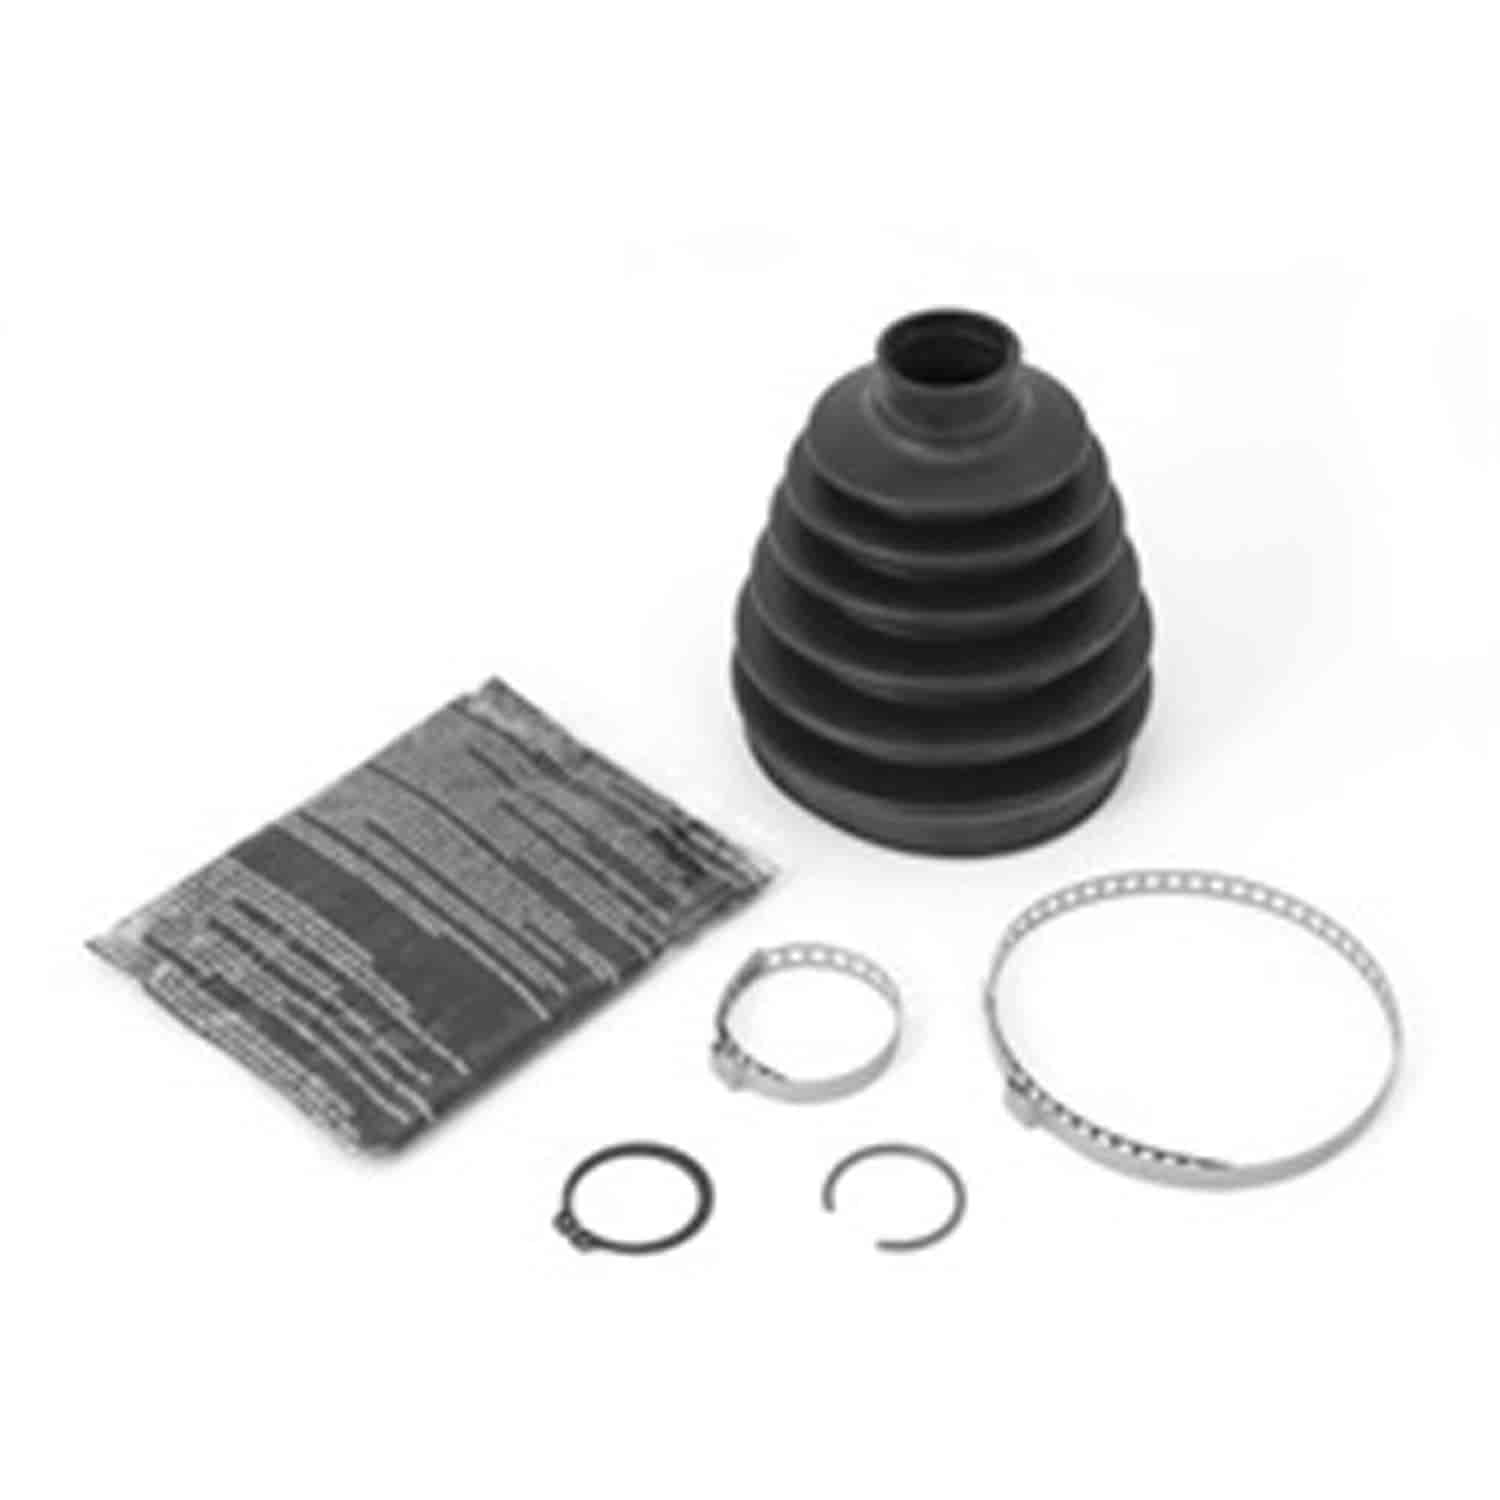 This front inner axle CV boot kit for Super Dana 30 from Omix-ADA fits the left or right side of 02-07 Jeep Liberty KJ .